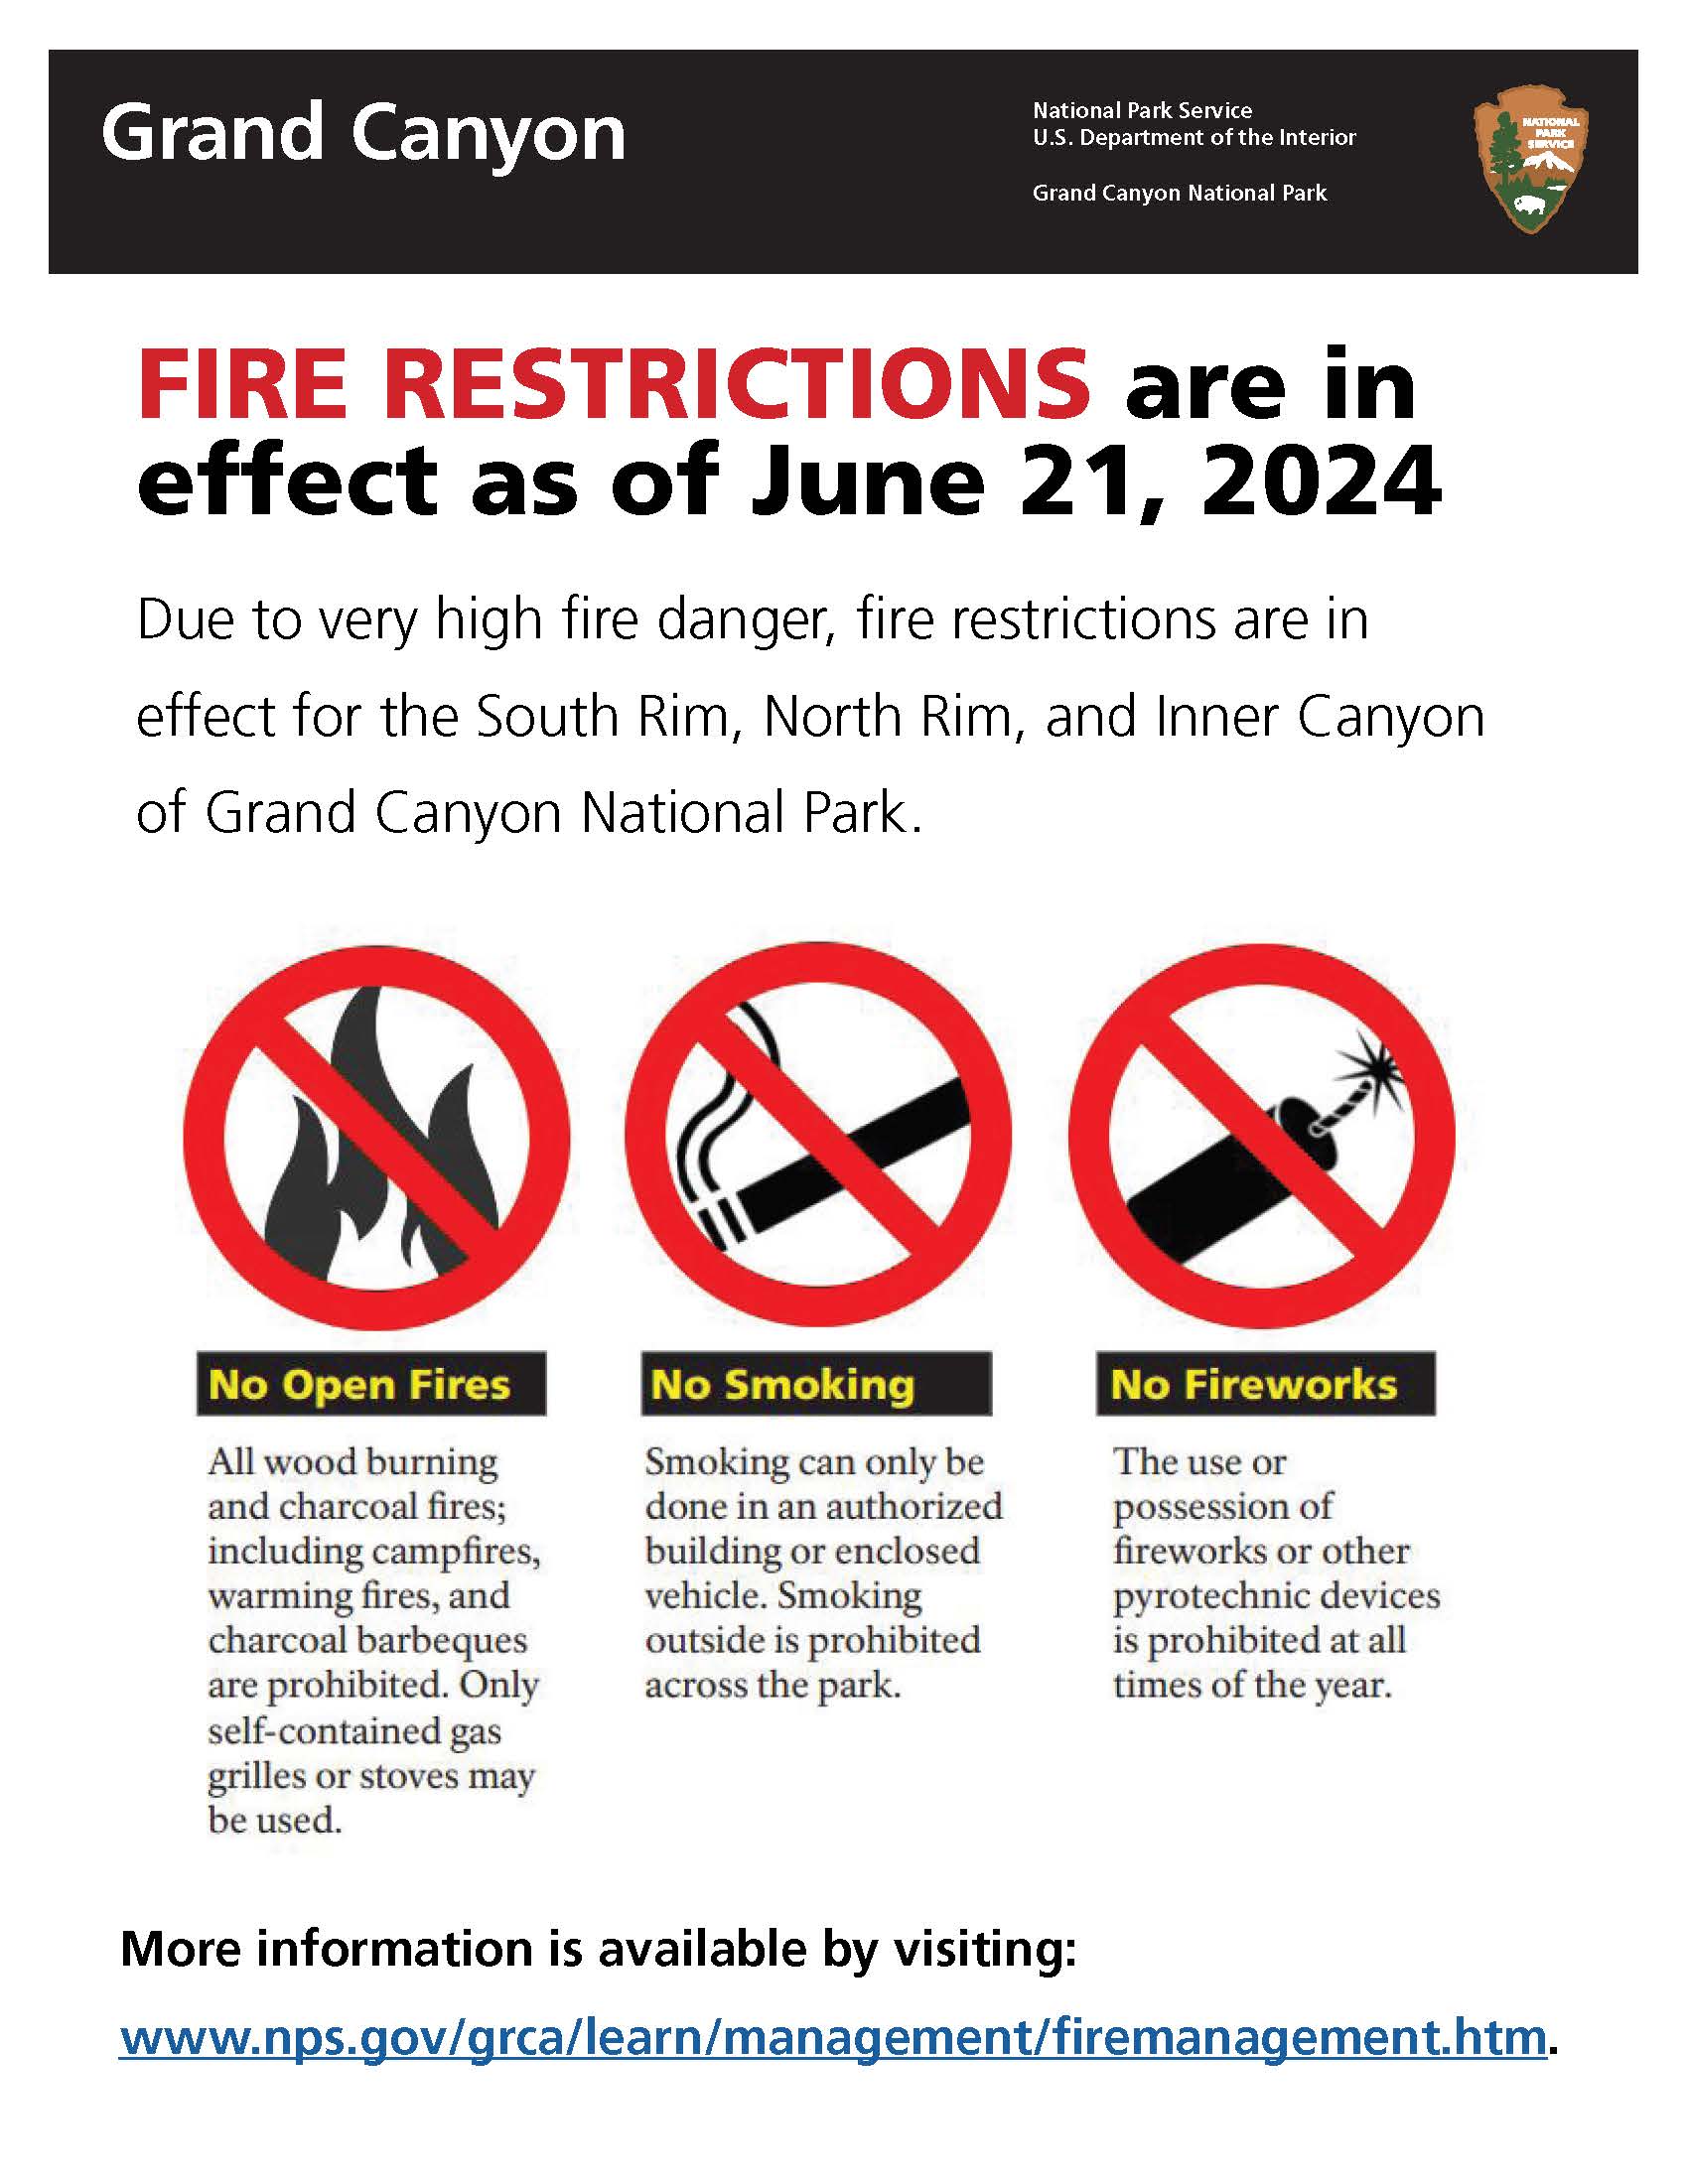 FIRE RESTRICTIONS are in effect as of June 21, 2024 Due to very high fire danger, fire restrictions are in effect. All fires with an open flame, smoking, and fireworks are prohibited.